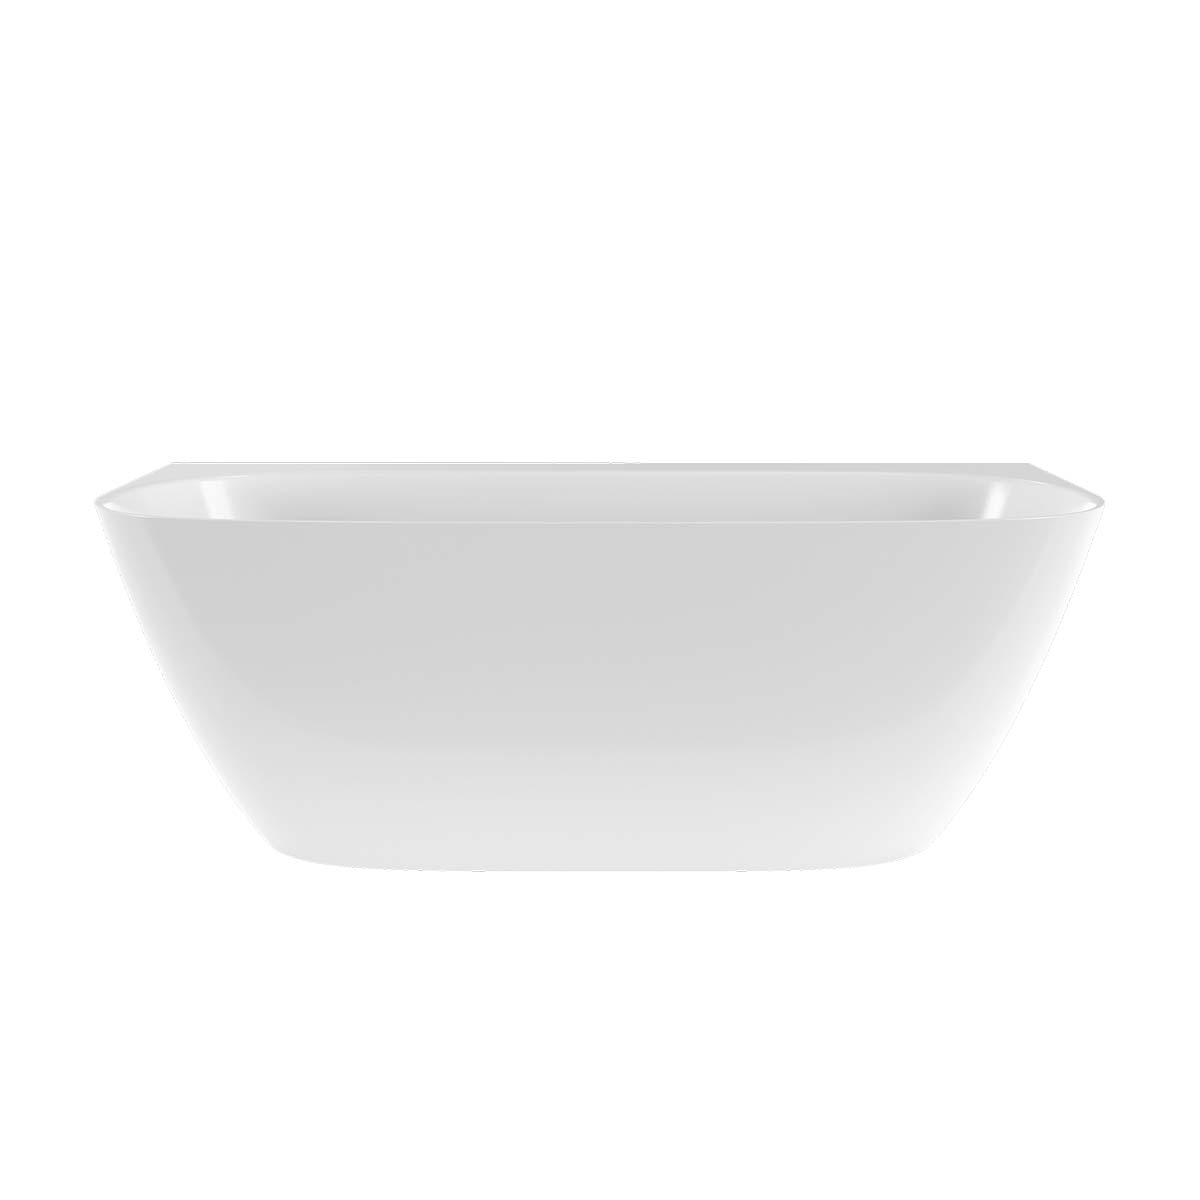 Victoria + Albert Lussari 1700 back to wall bath in gloss white. Also available in matt white or custom colour exterior. Distributed in Australia by Luxe by Design, Brisbane.